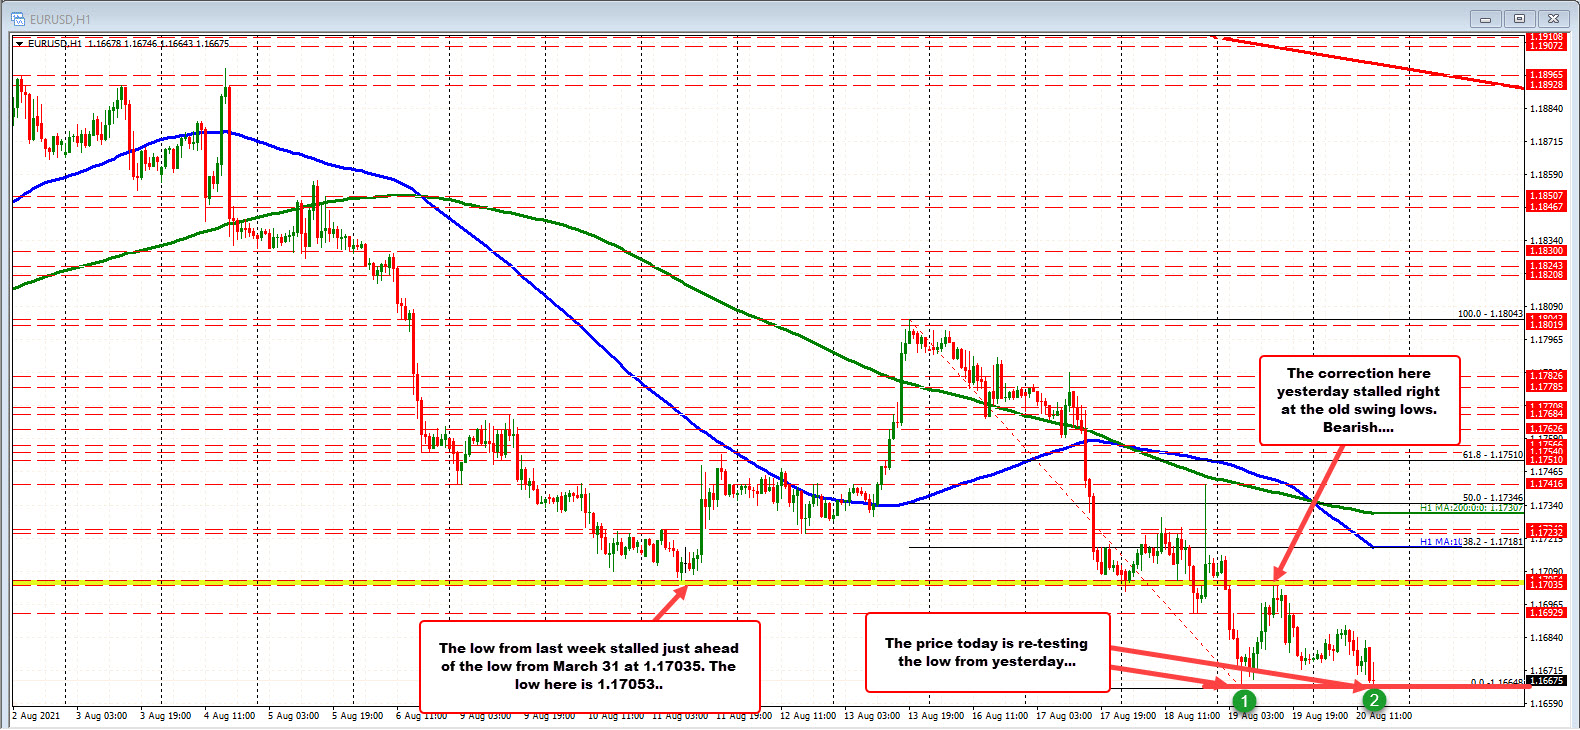 EURUSD test 2021 low (at lowest level since November 2020).